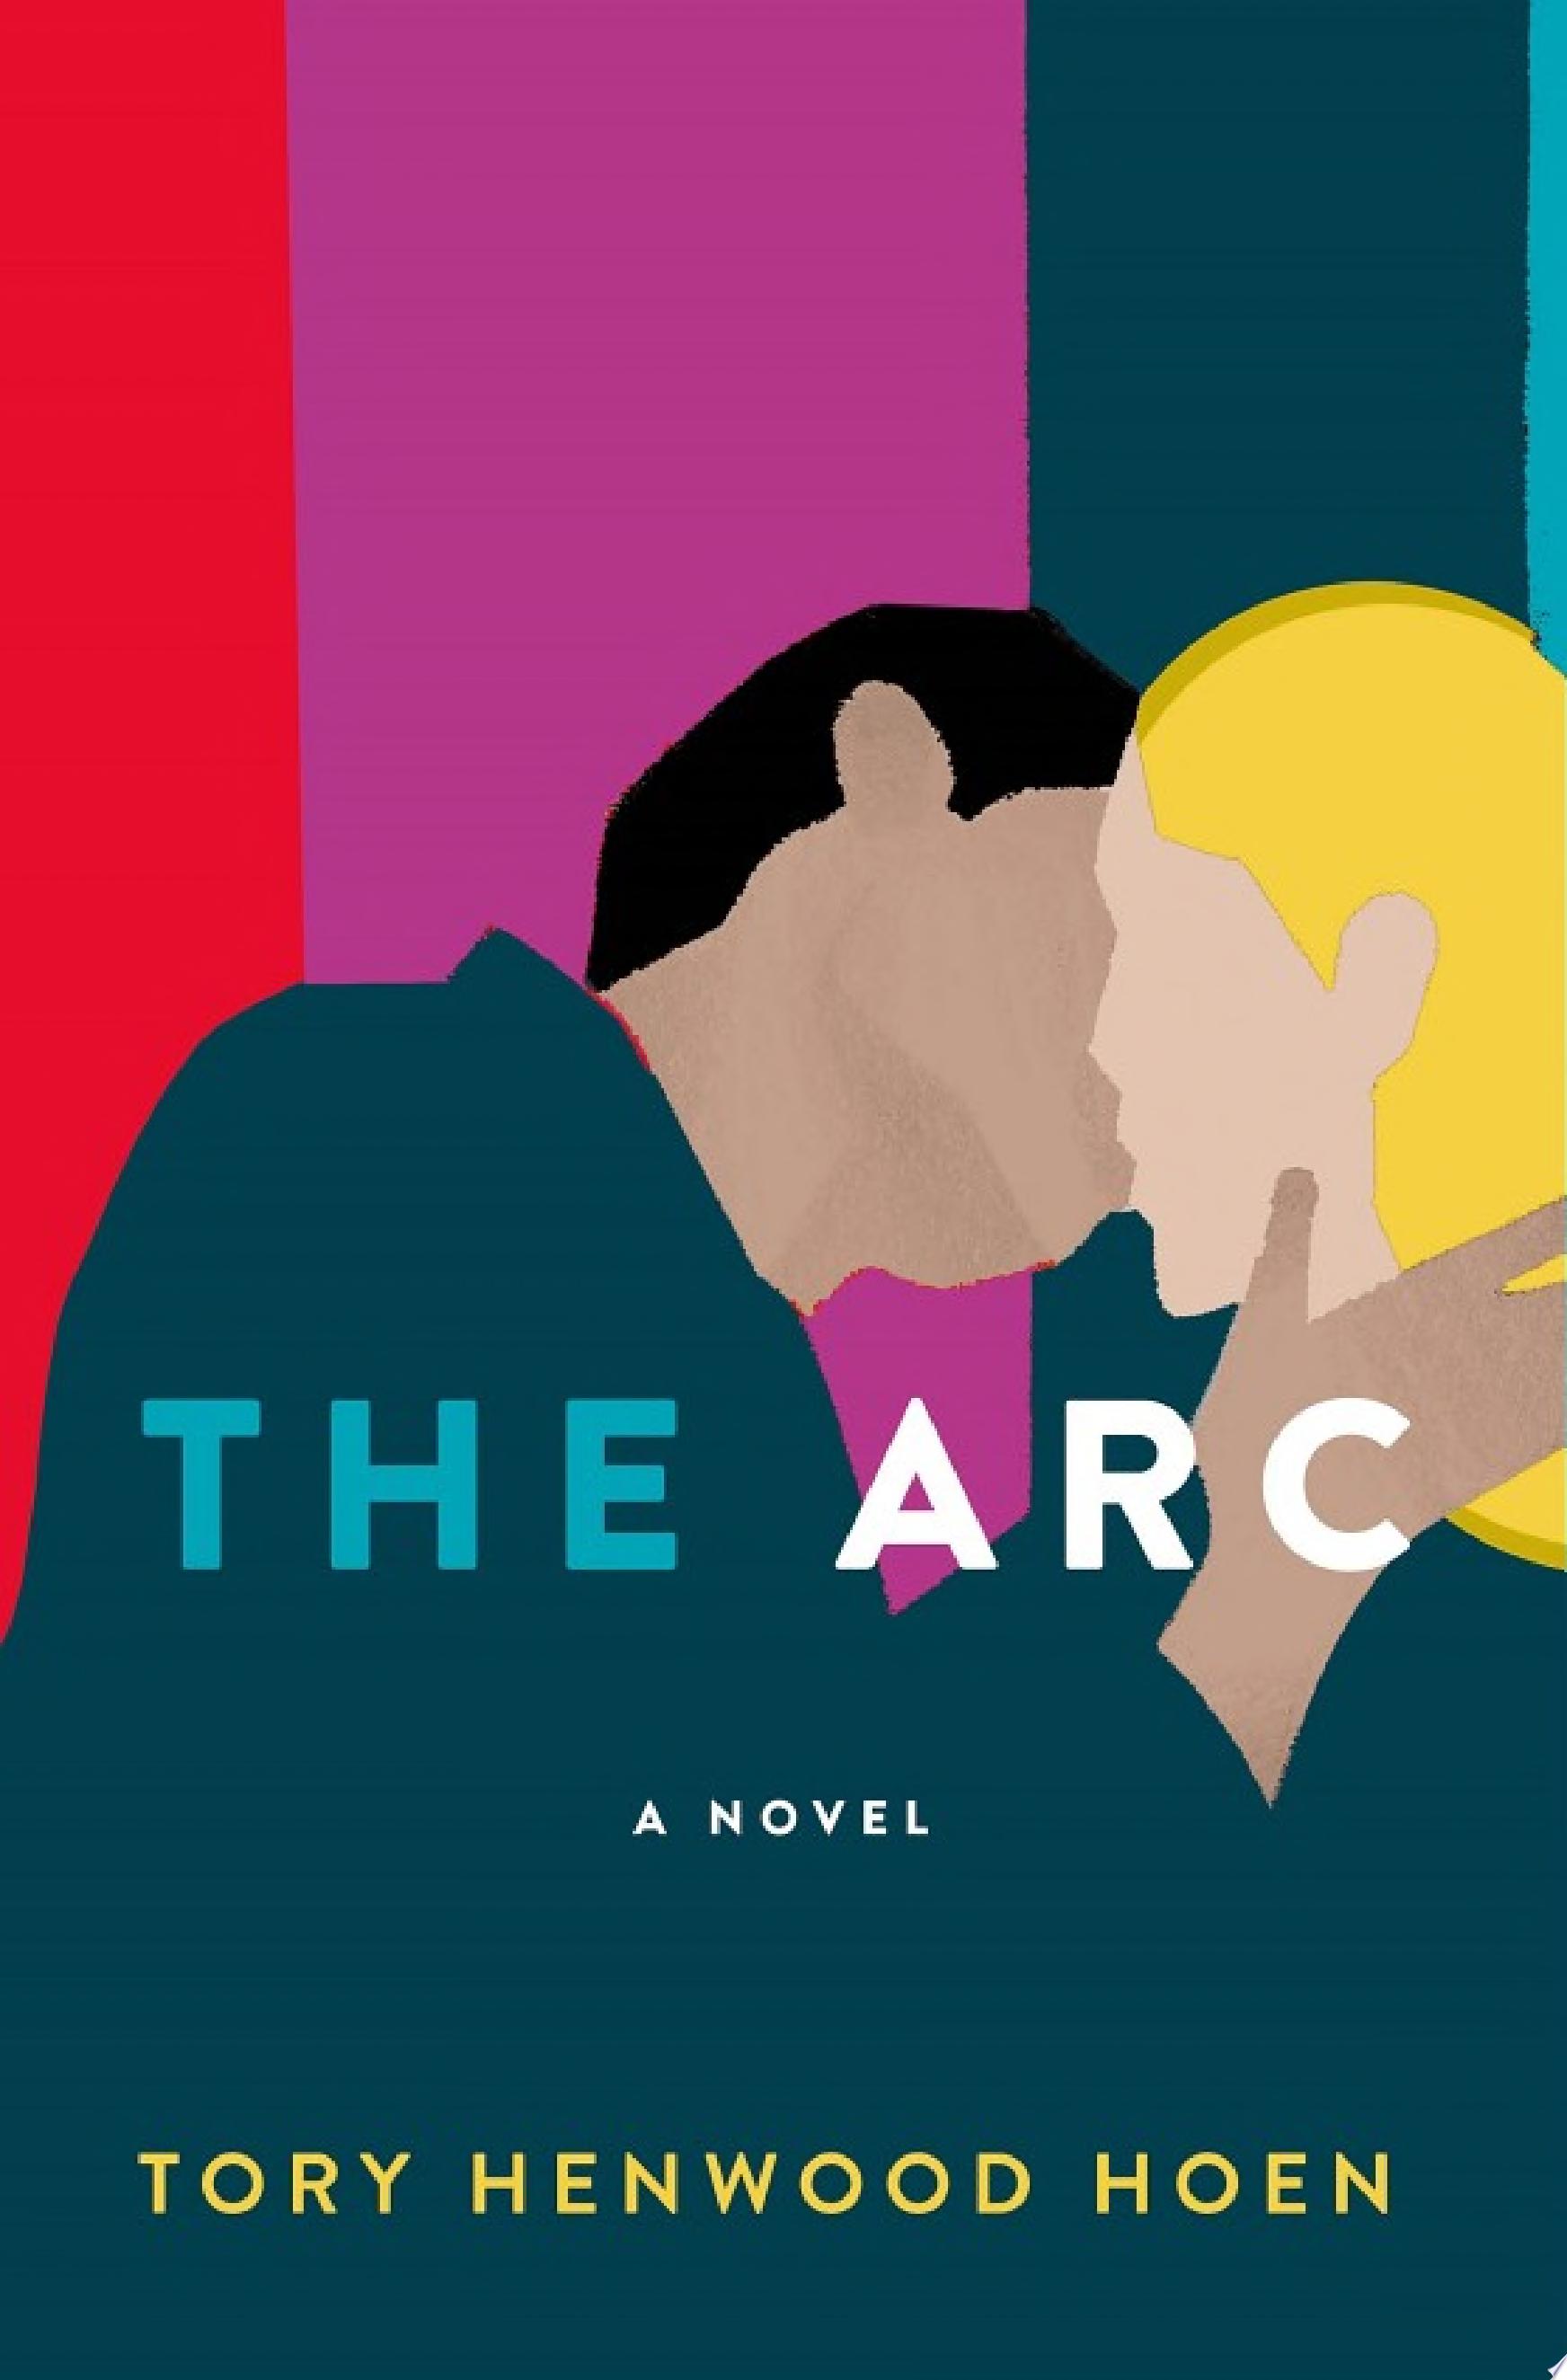 Image for "The Arc"